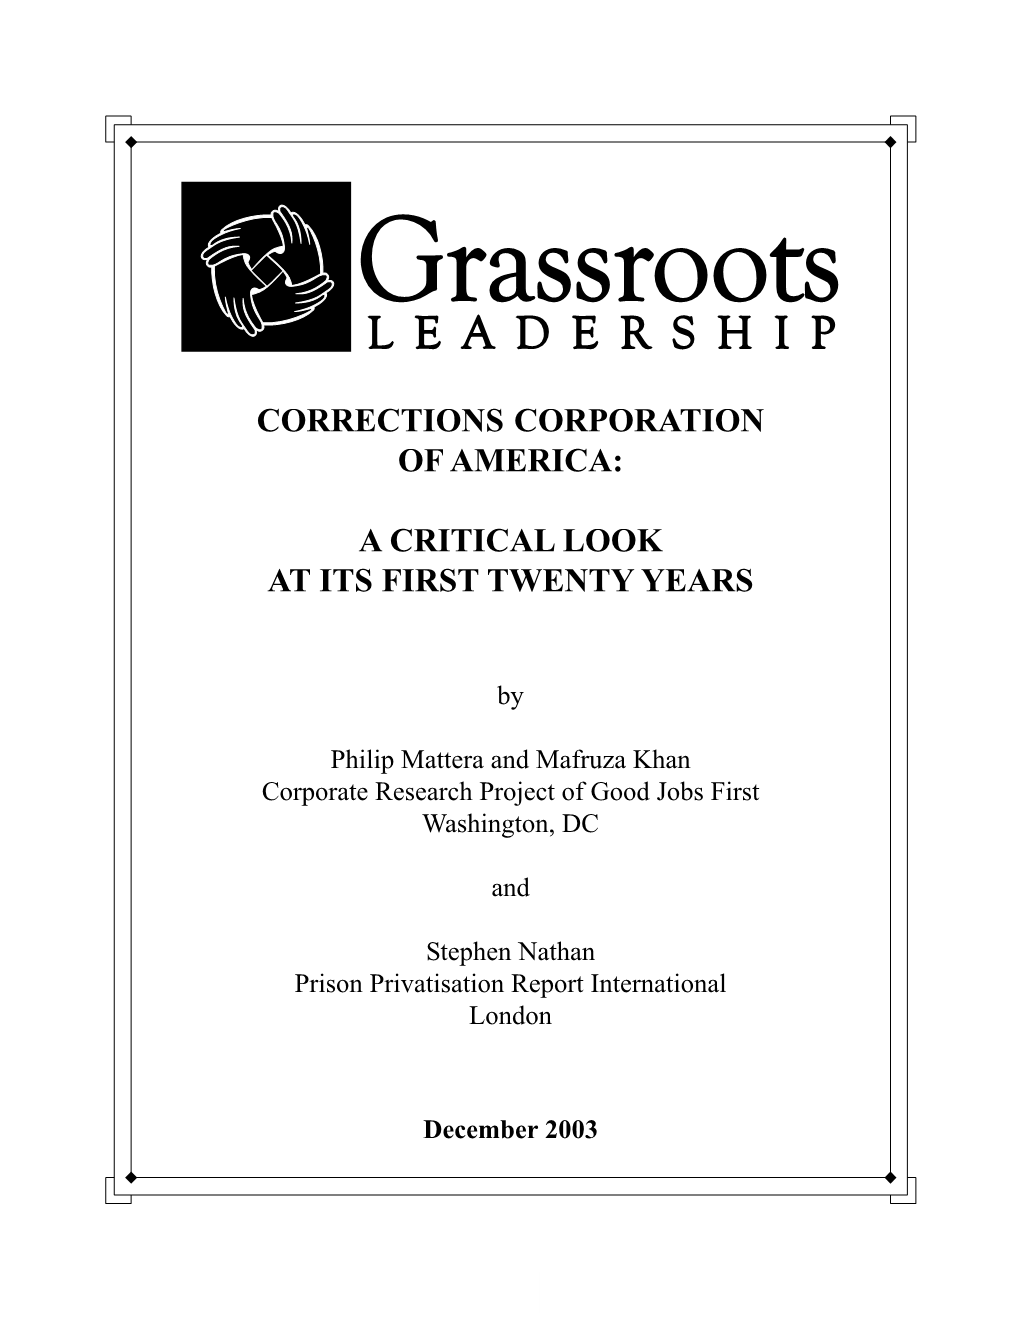 Correction Corporation of America: a Critical Look at Its First Twenty Years